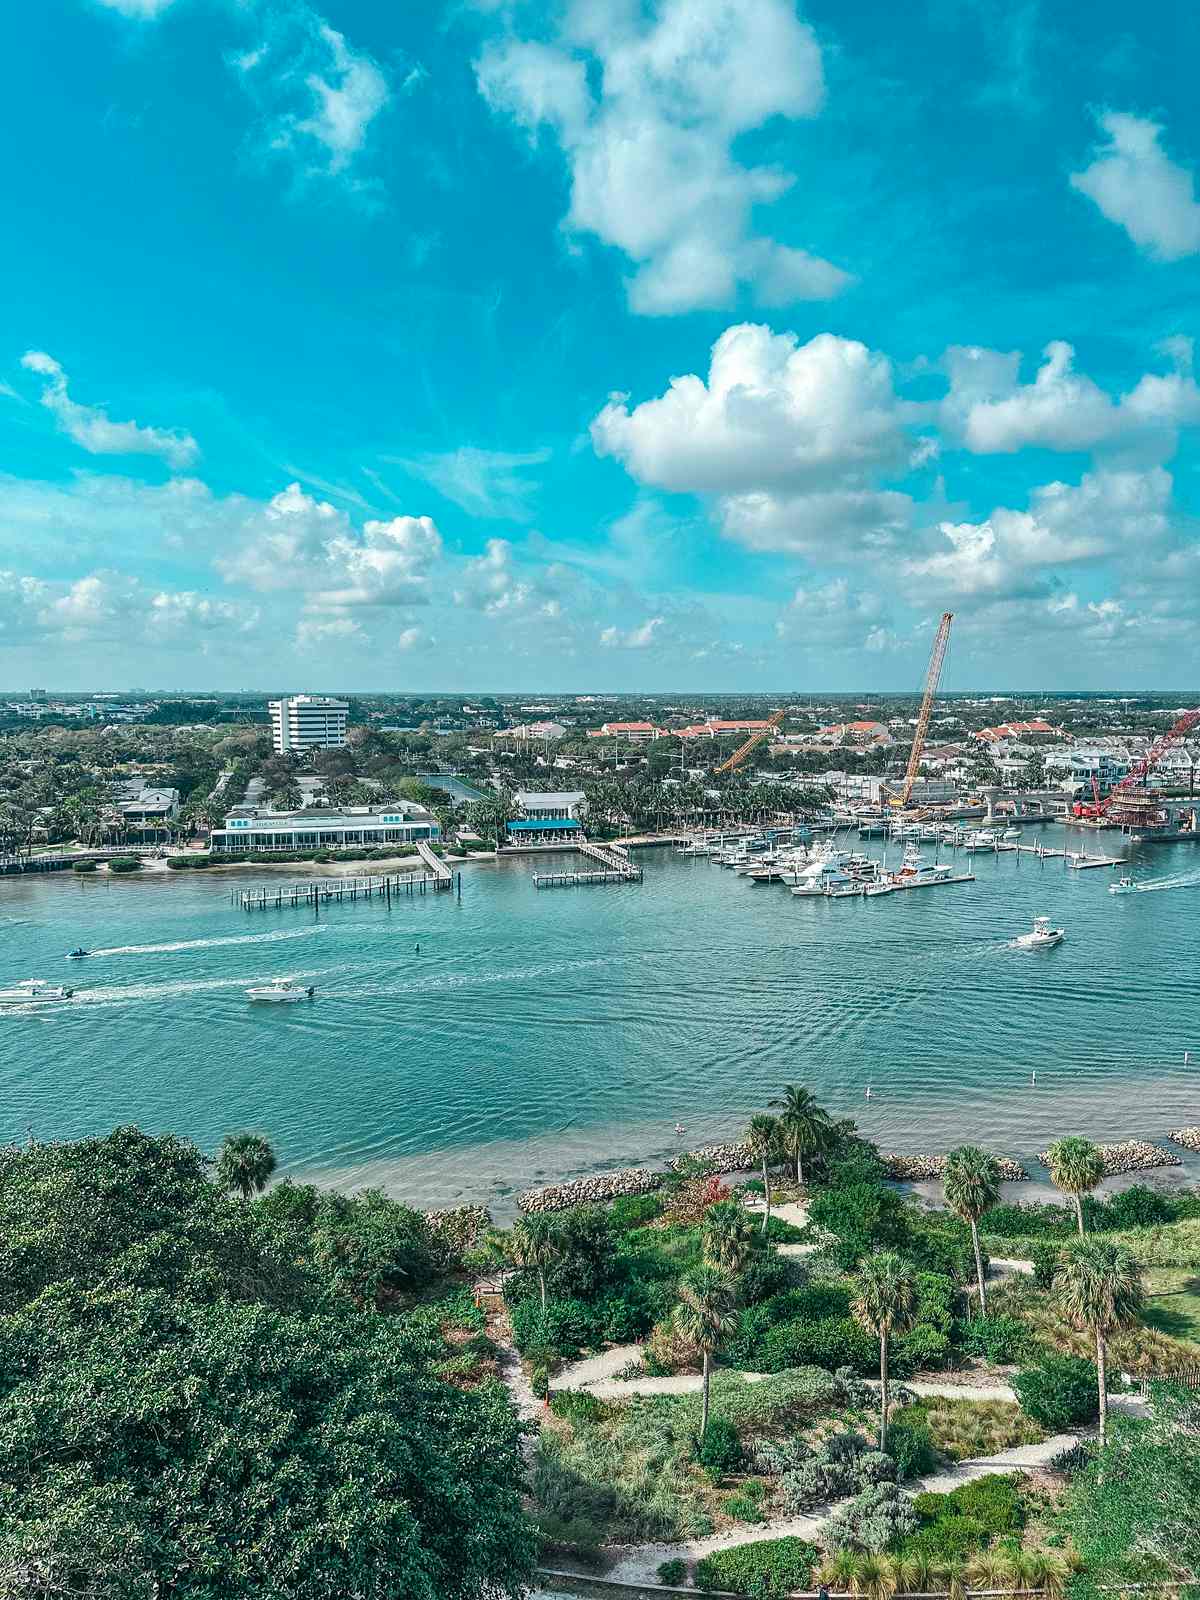 Views from the top of the Jupiter Inlet Lighthouse and Museum